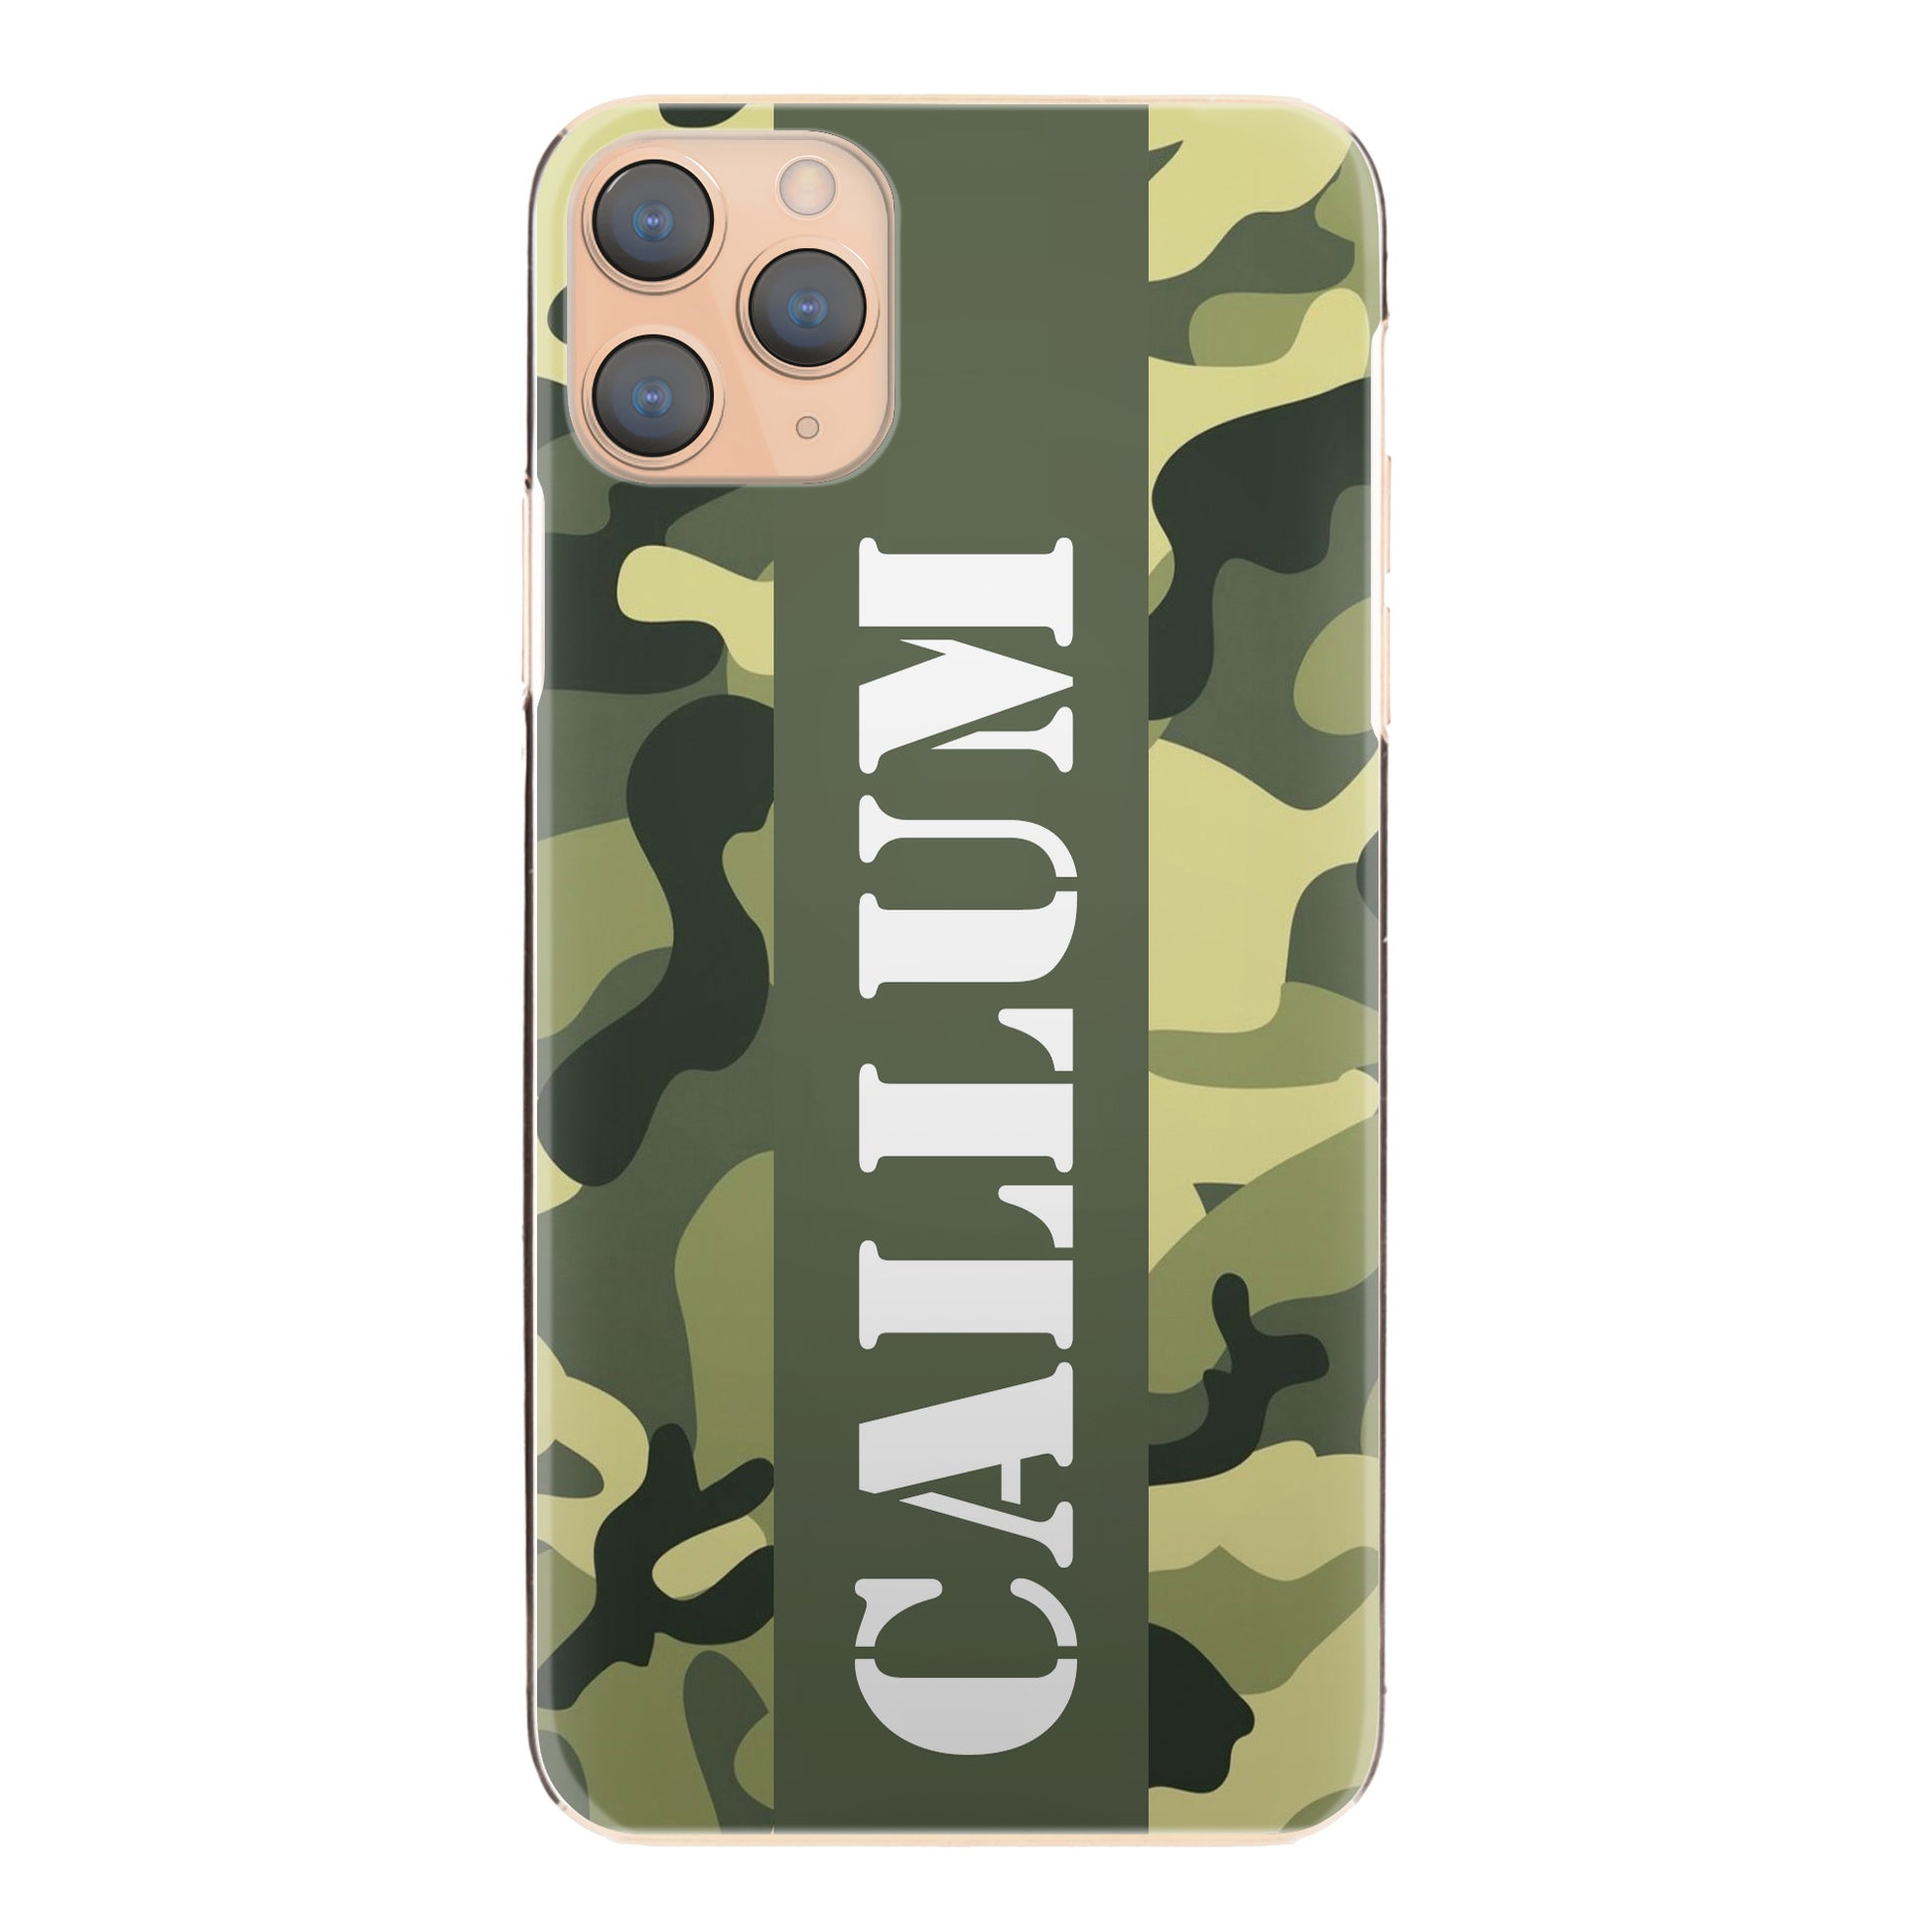 Personalised Samsung Galaxy Phone Hard Case with Military Text on Classic Green Camo